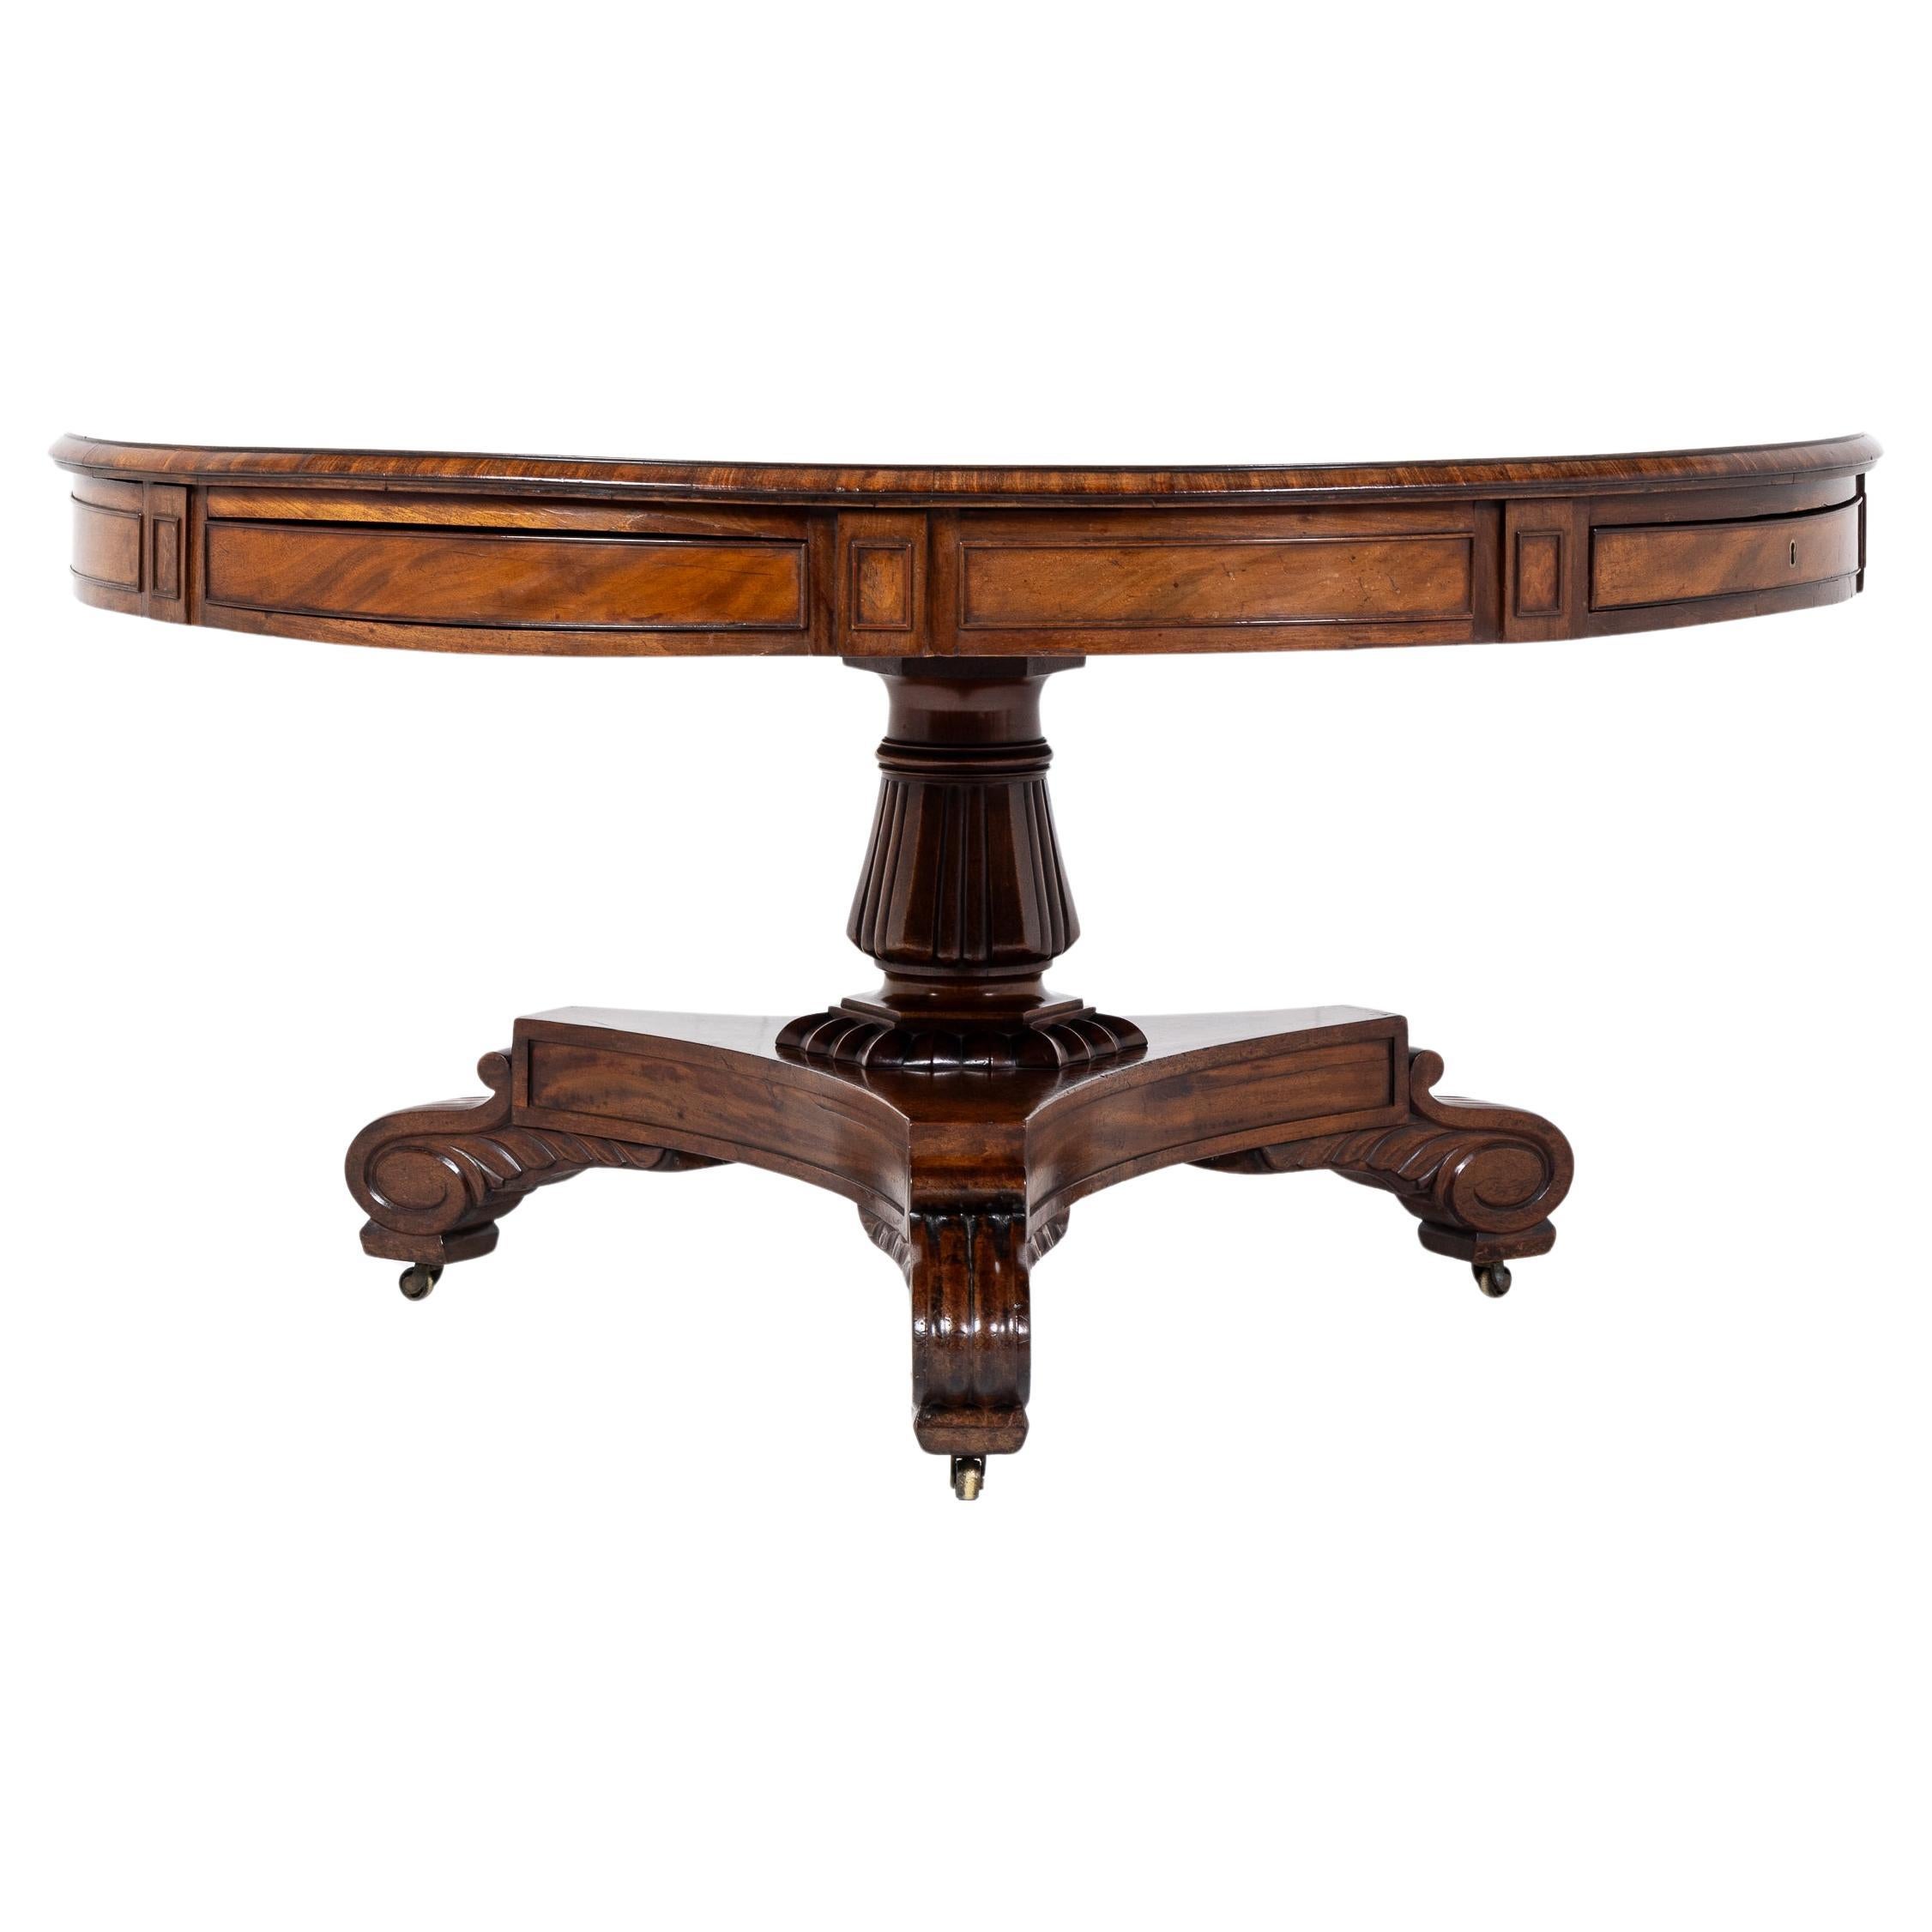 Late Regency/William IV Mahogany Drum/Centre Table For Sale